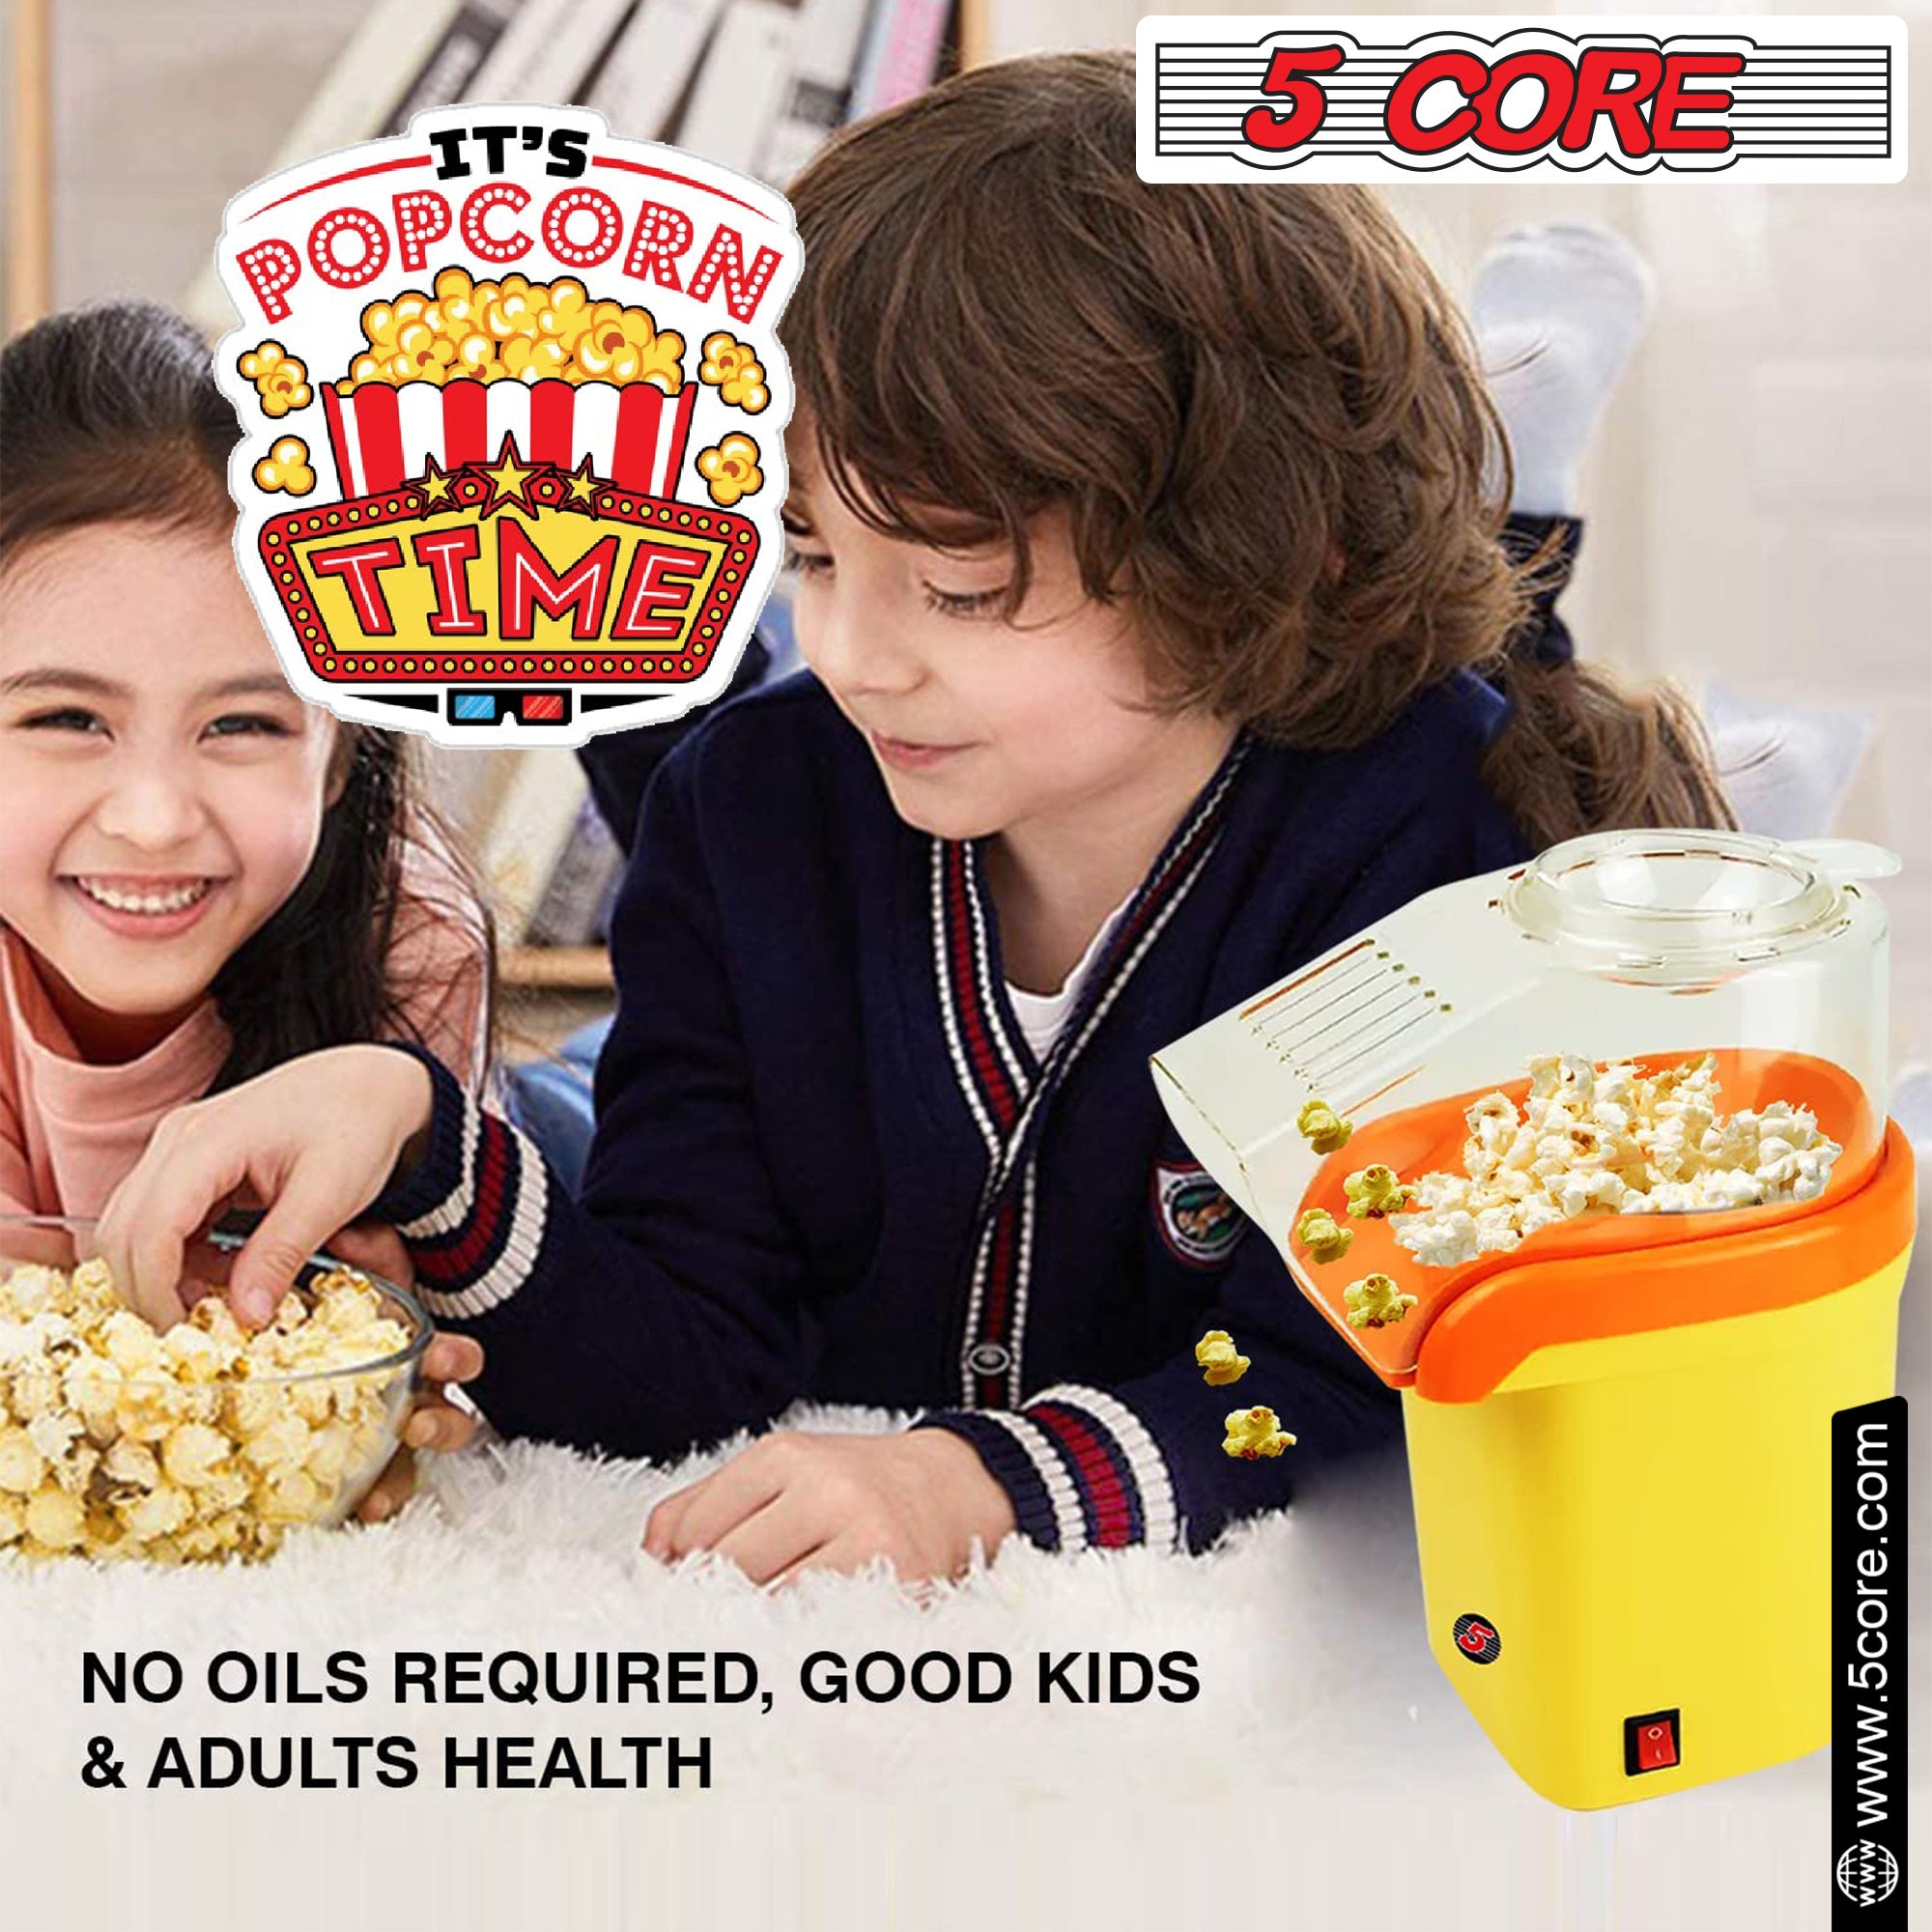 5 core popcorn popper maker no oils required, good kids and adults health.